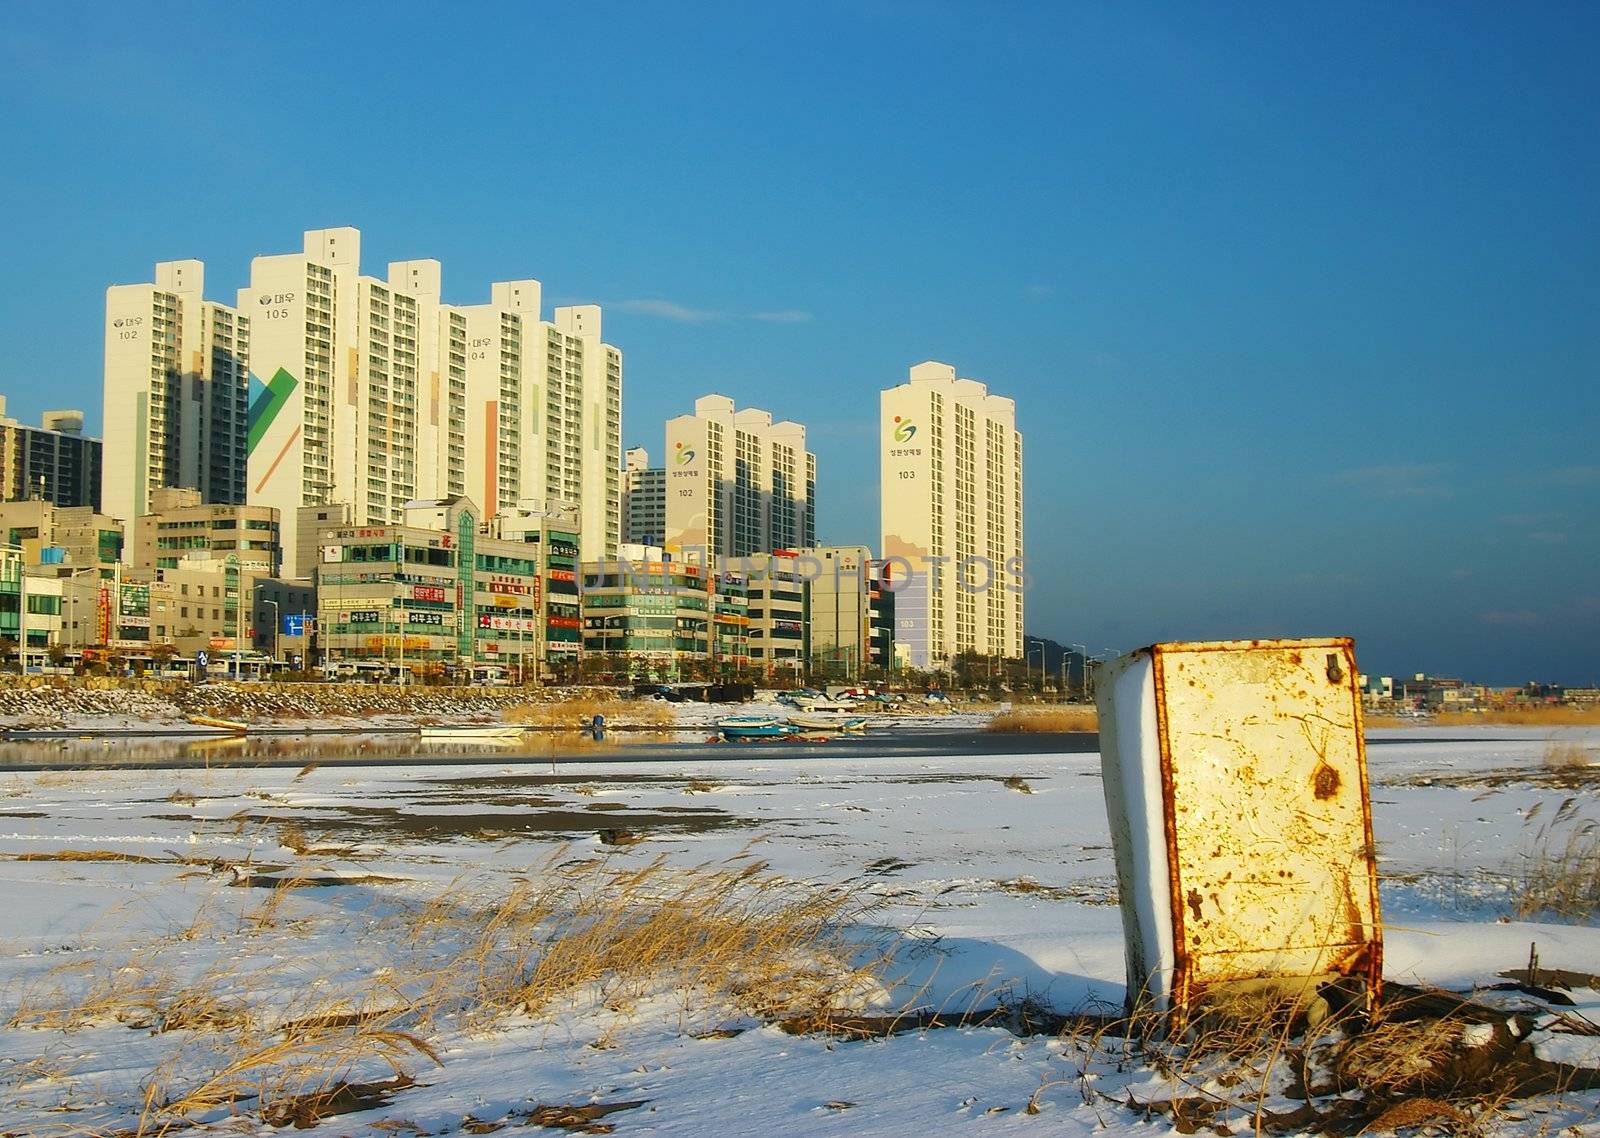 An abandoned fridge sits in the snow on Dadaepo Beach, Busan, South Korea. A visual metaphor for resource waste.